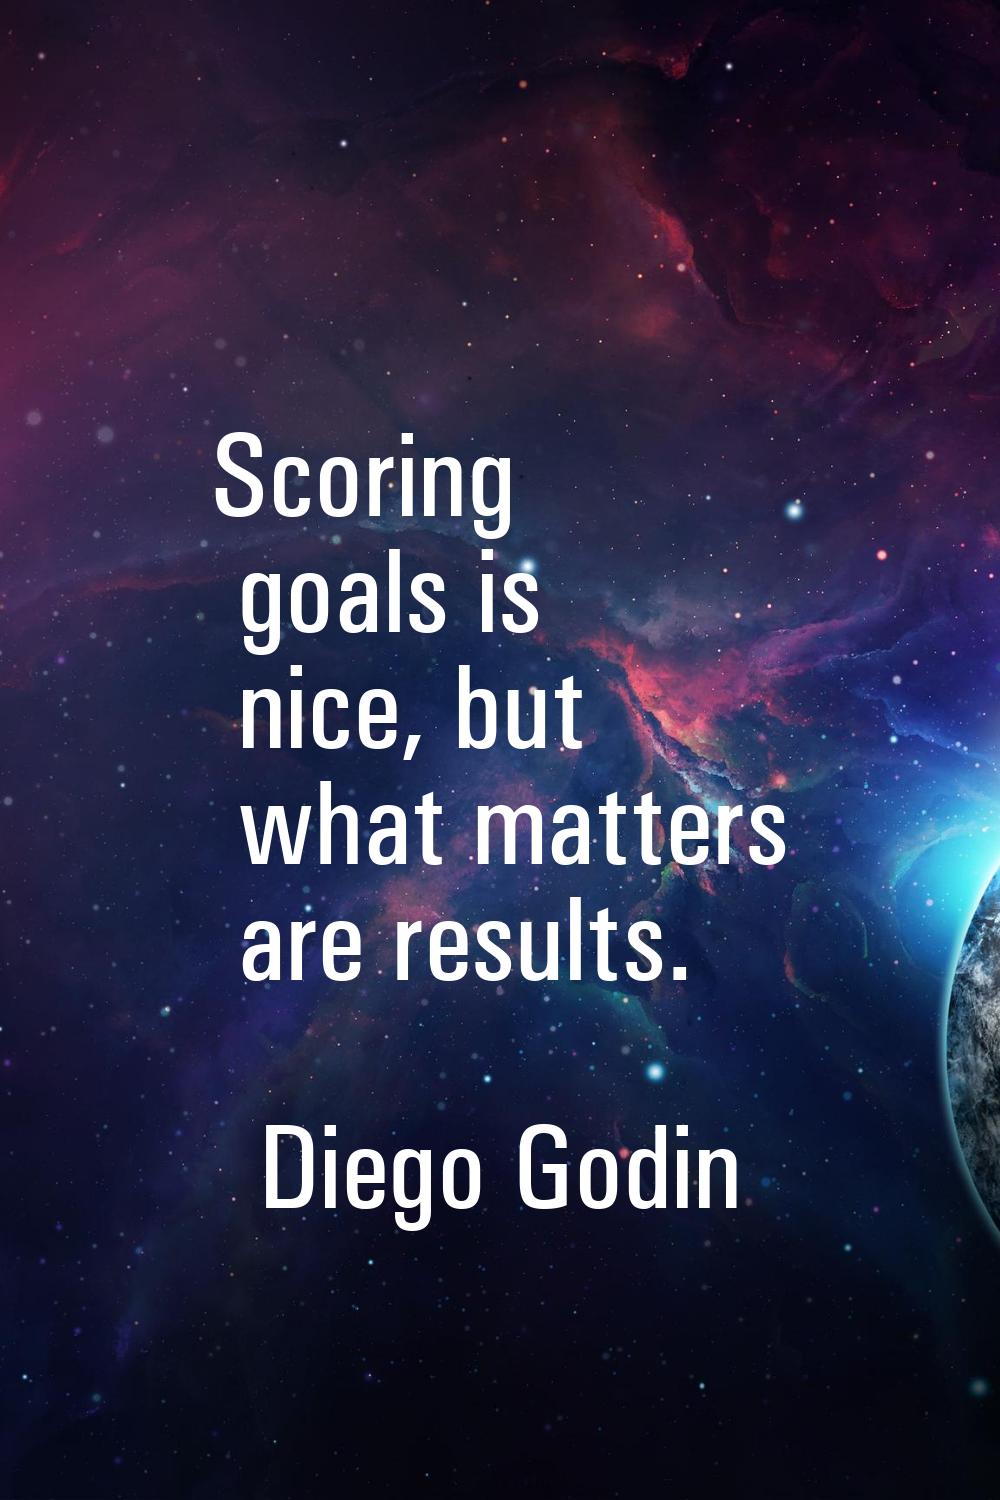 Scoring goals is nice, but what matters are results.